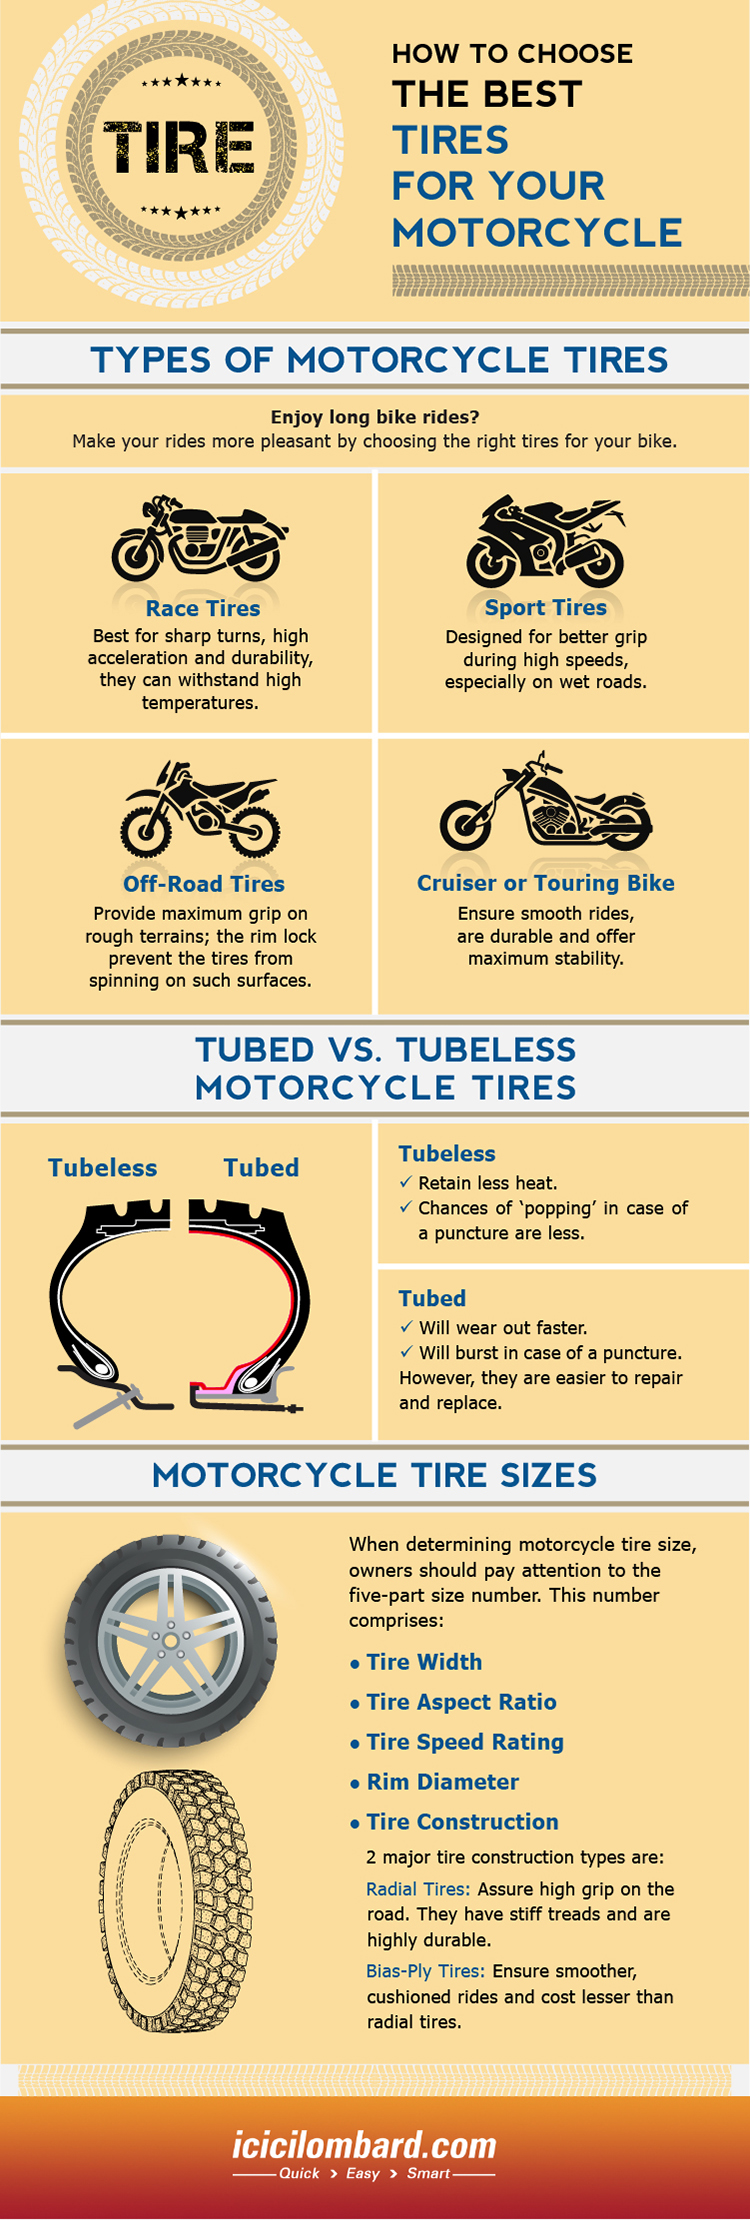 Best Tires For Motorcycle